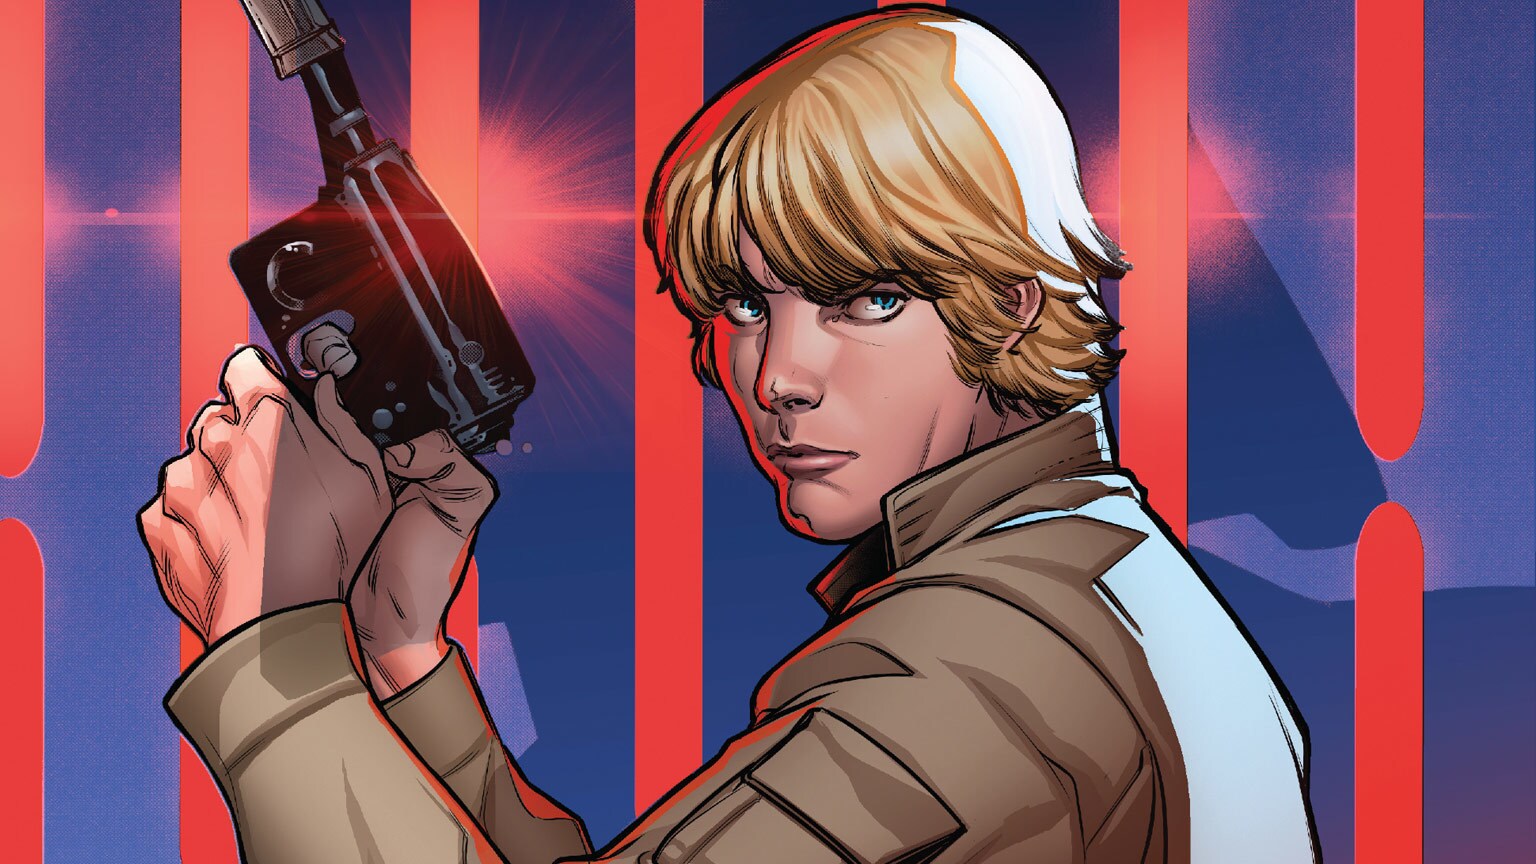 Lando and Chewie Run Into Tatooine Trouble in Marvel's Star Wars #2 - Exclusive